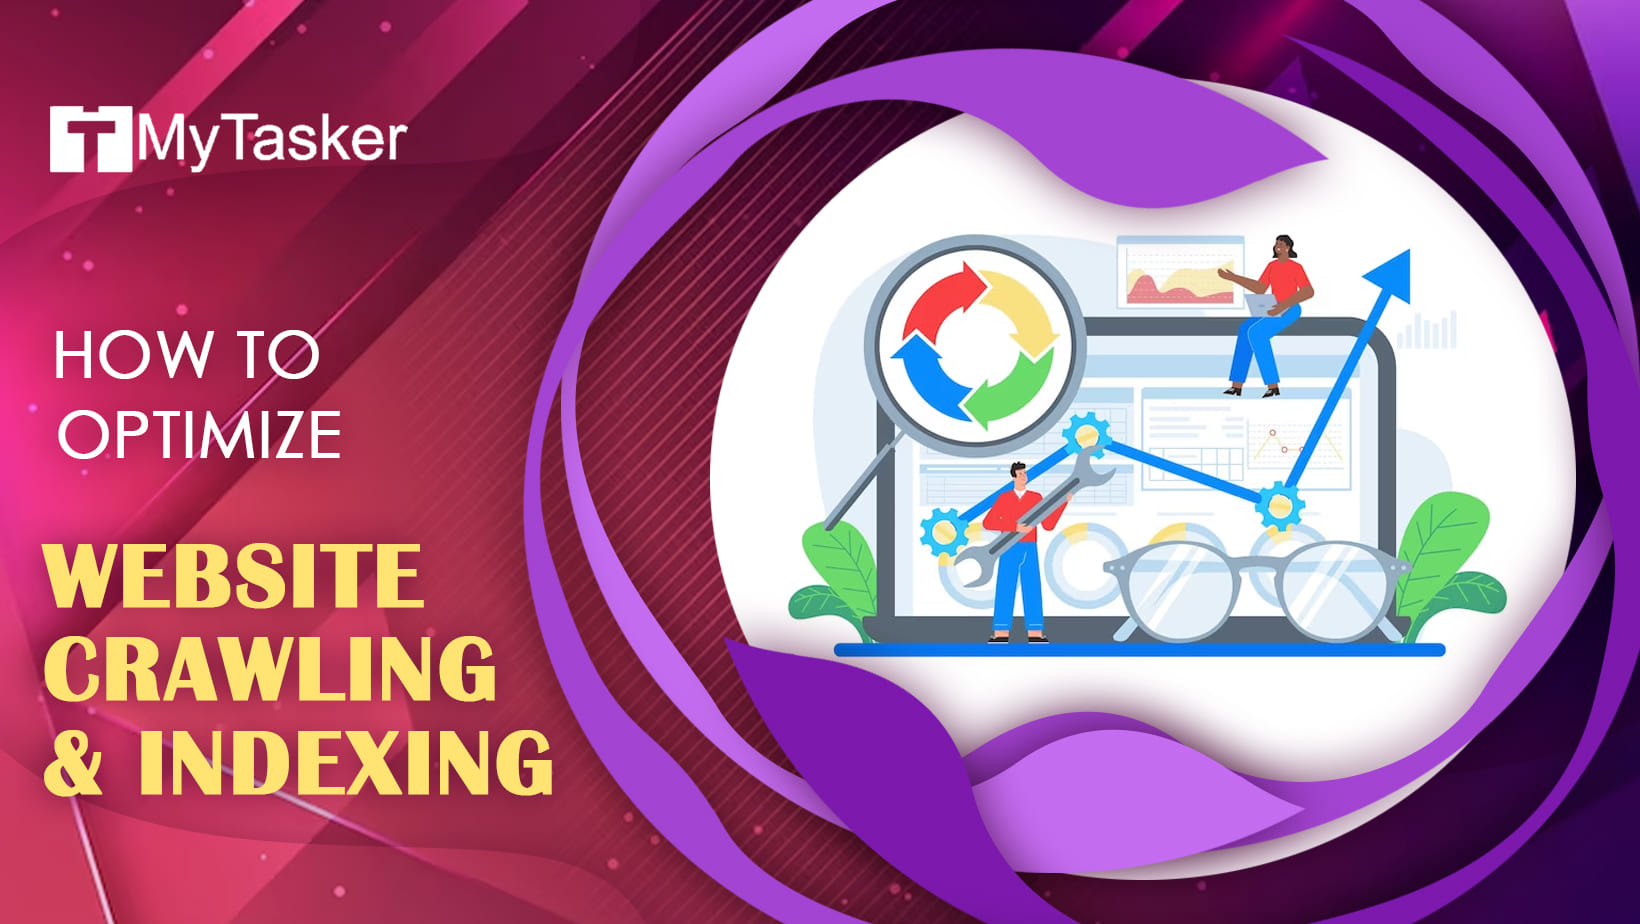 How To Optimize Website Crawling & Indexing